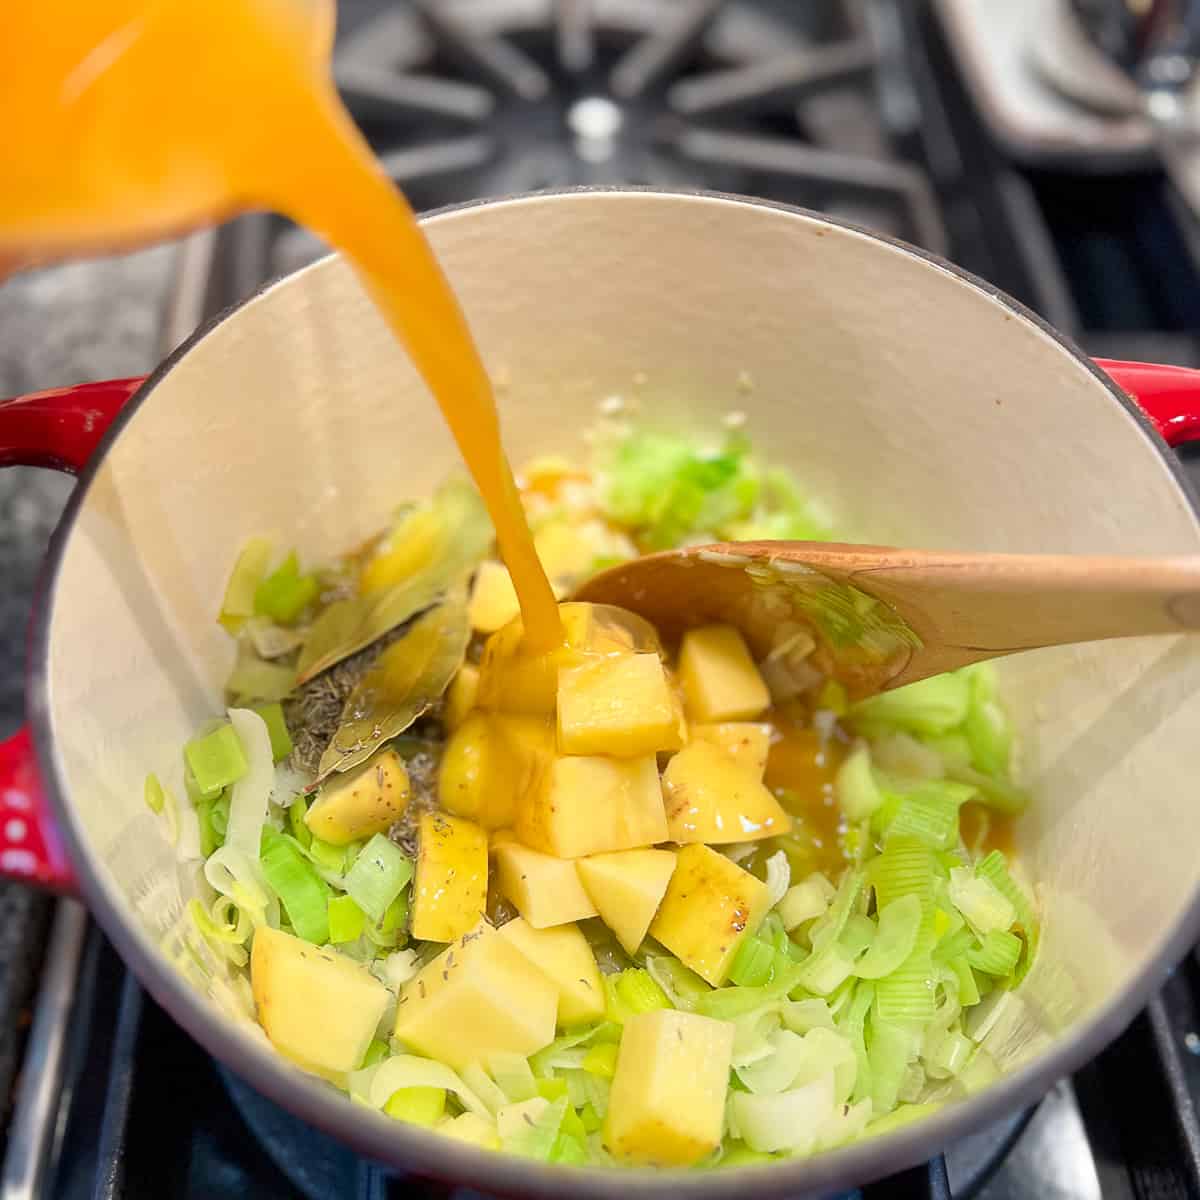 vegetable broth being added to the pot with leeks, potatoes, and spices on the stovetop